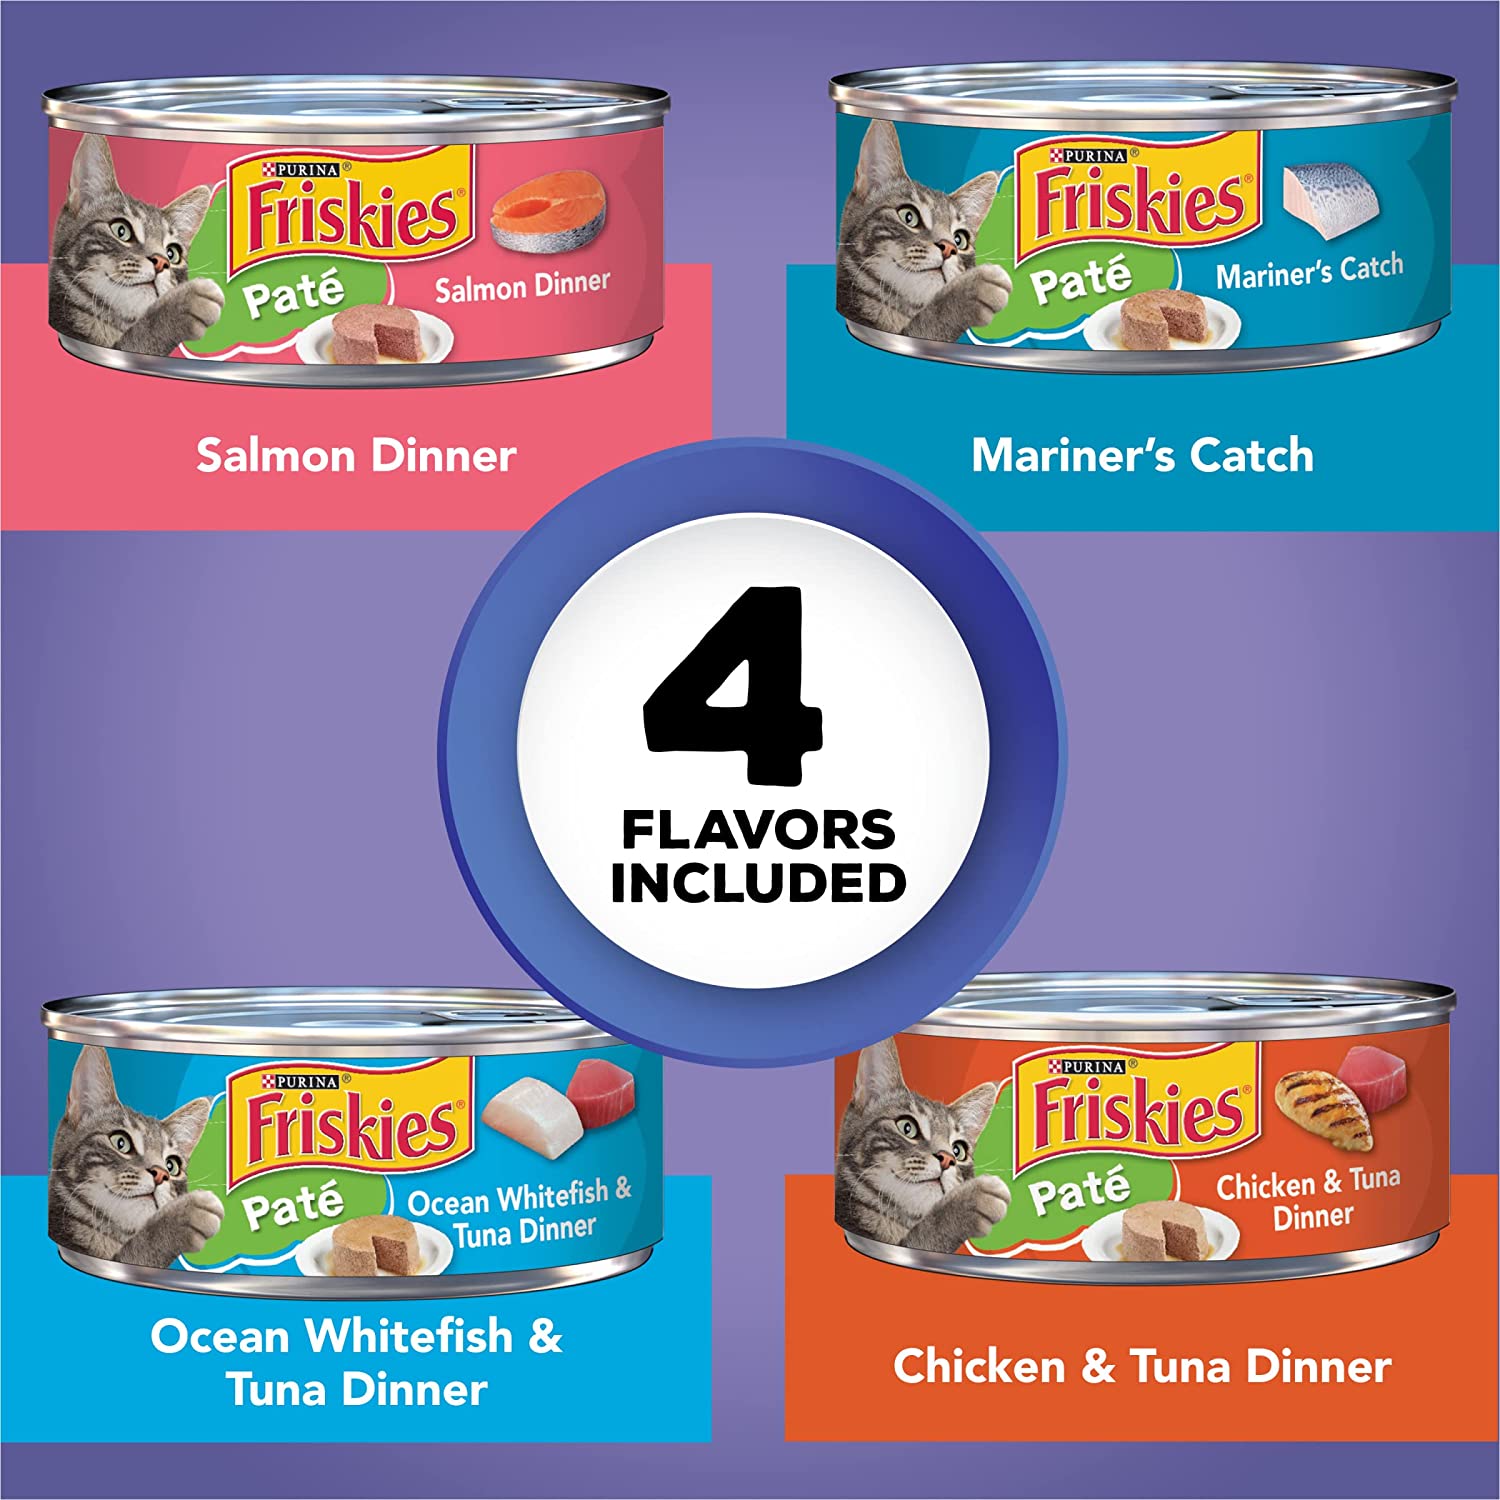 Purina Friskies Wet Cat Food Pate Variety Pack Seafood and Chicken Pate Favorites - (40) 5.5 oz. Cans